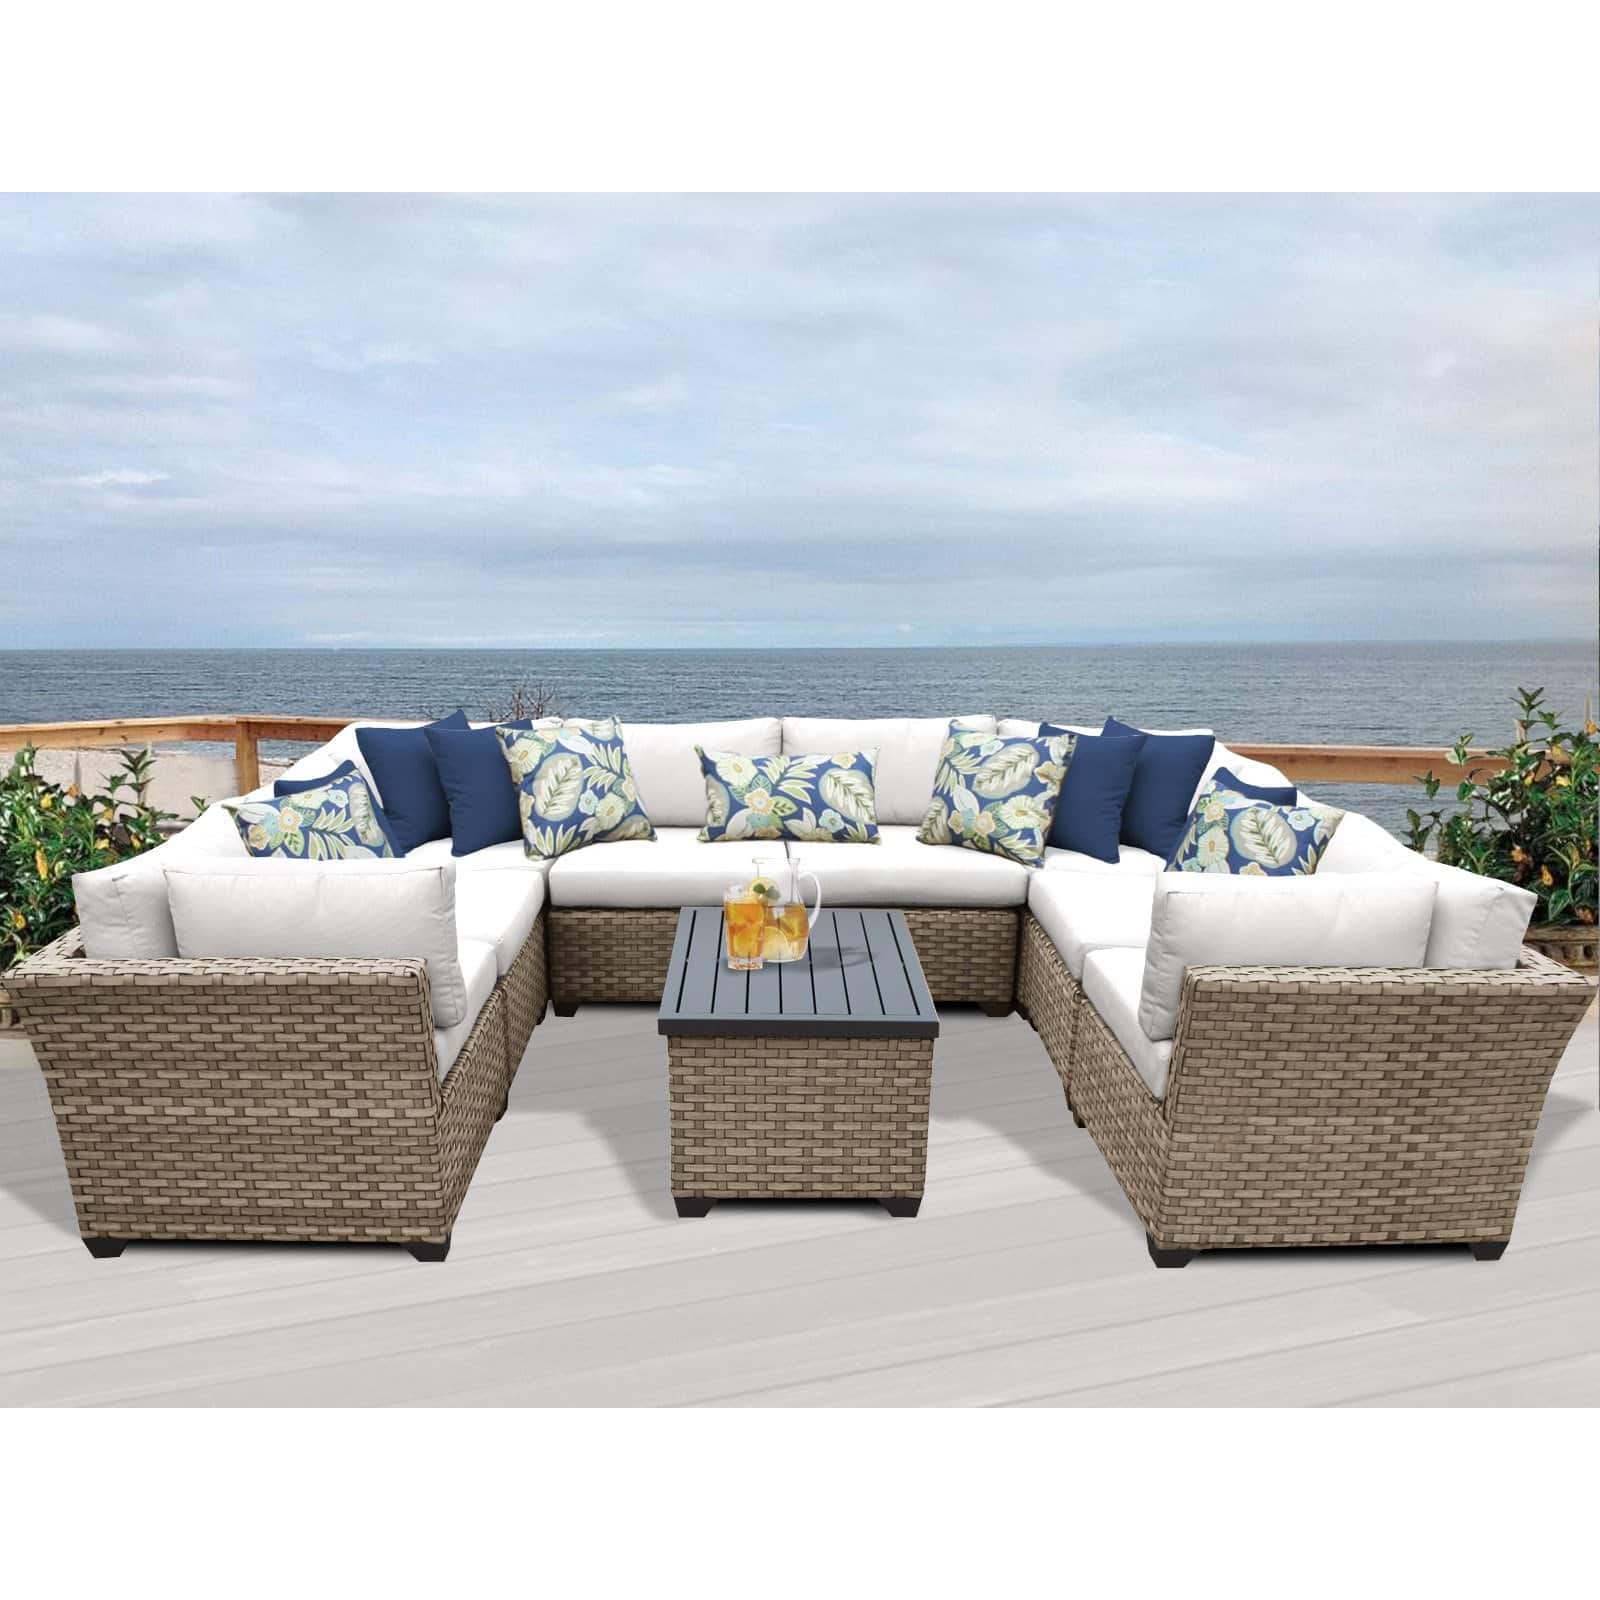 TK Classics Monterey Wicker 9 Piece Patio Conversation Set with Coffee Table and 2 Sets of Cushion Covers - image 4 of 5